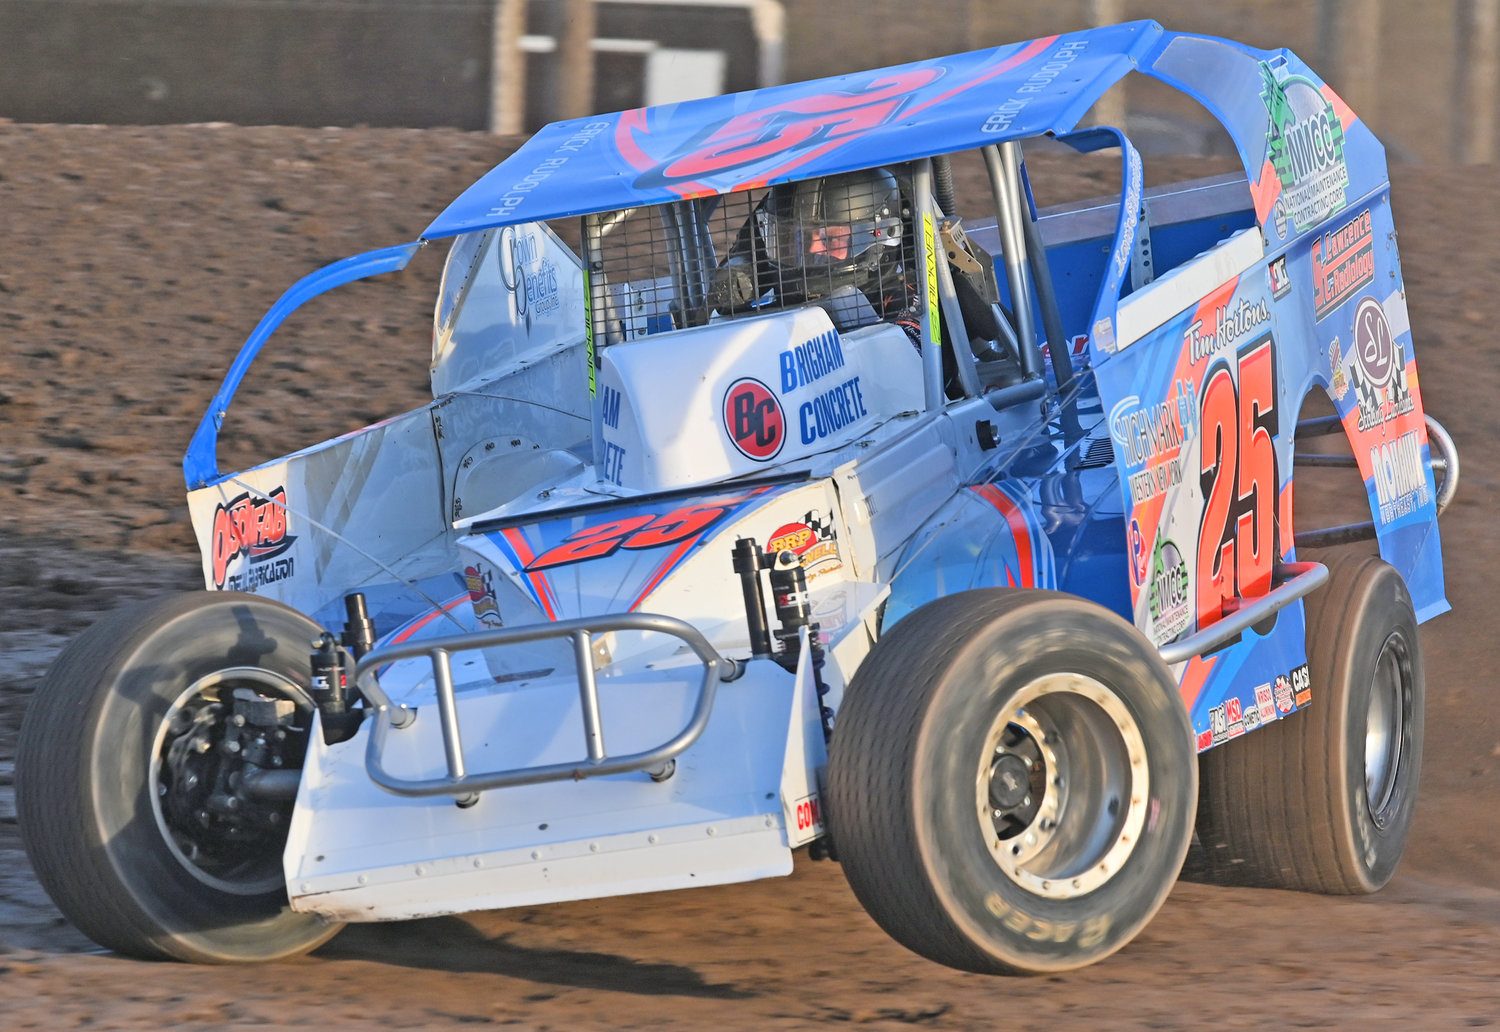 MASHING THE GAS — Former Utica-Rome Speedway track champion Erick Rudolph practices his modified at the "Home of Heroes" last Friday night. Although U-R Speedway won't be his Friday night track, Rudolph will be racing in many of the special shows on the U-R schedule this season.